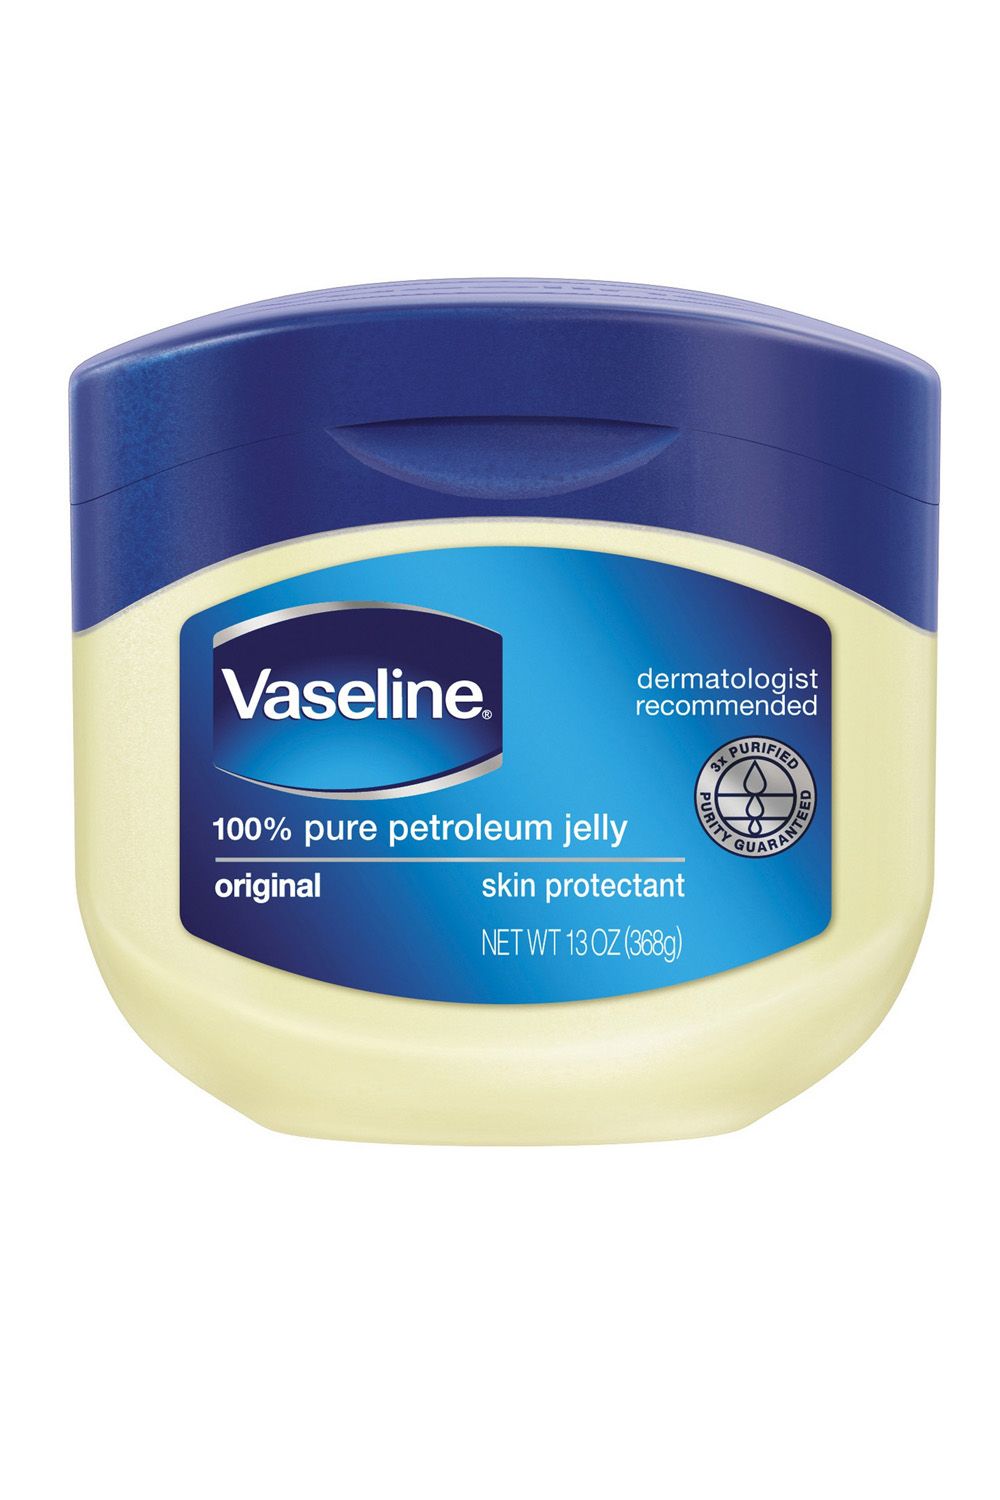 how to get hair dye off skin – vaseline petroleum jelly